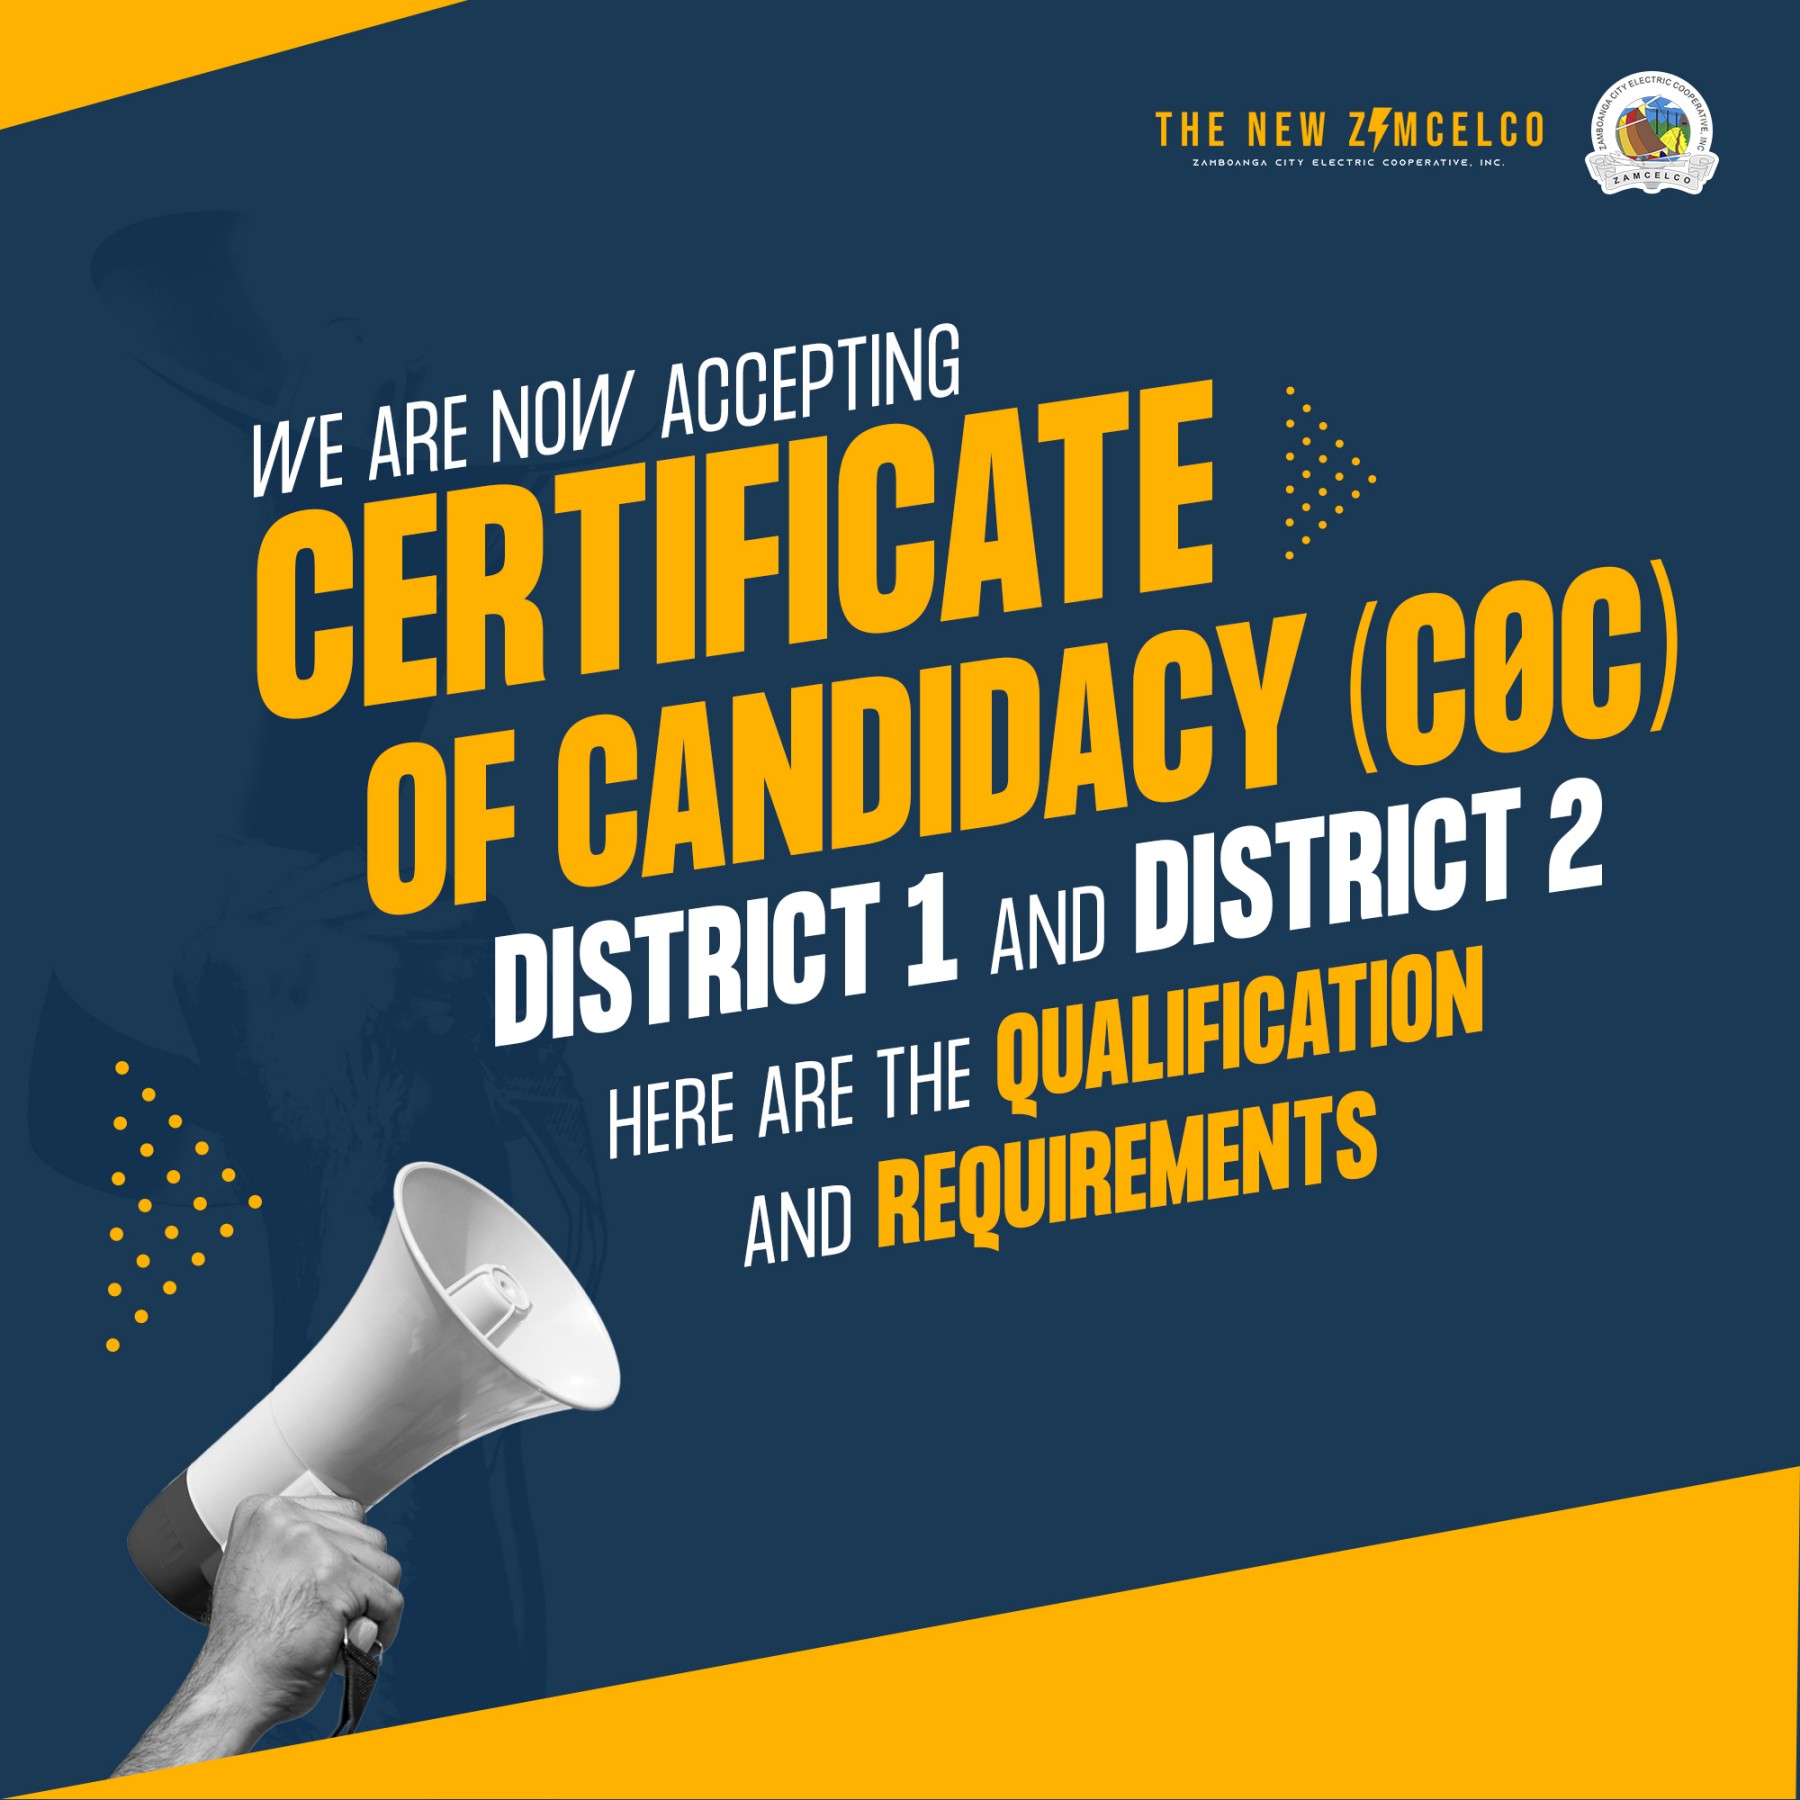 Officially Accepting Certificate of Candidacy (COC)